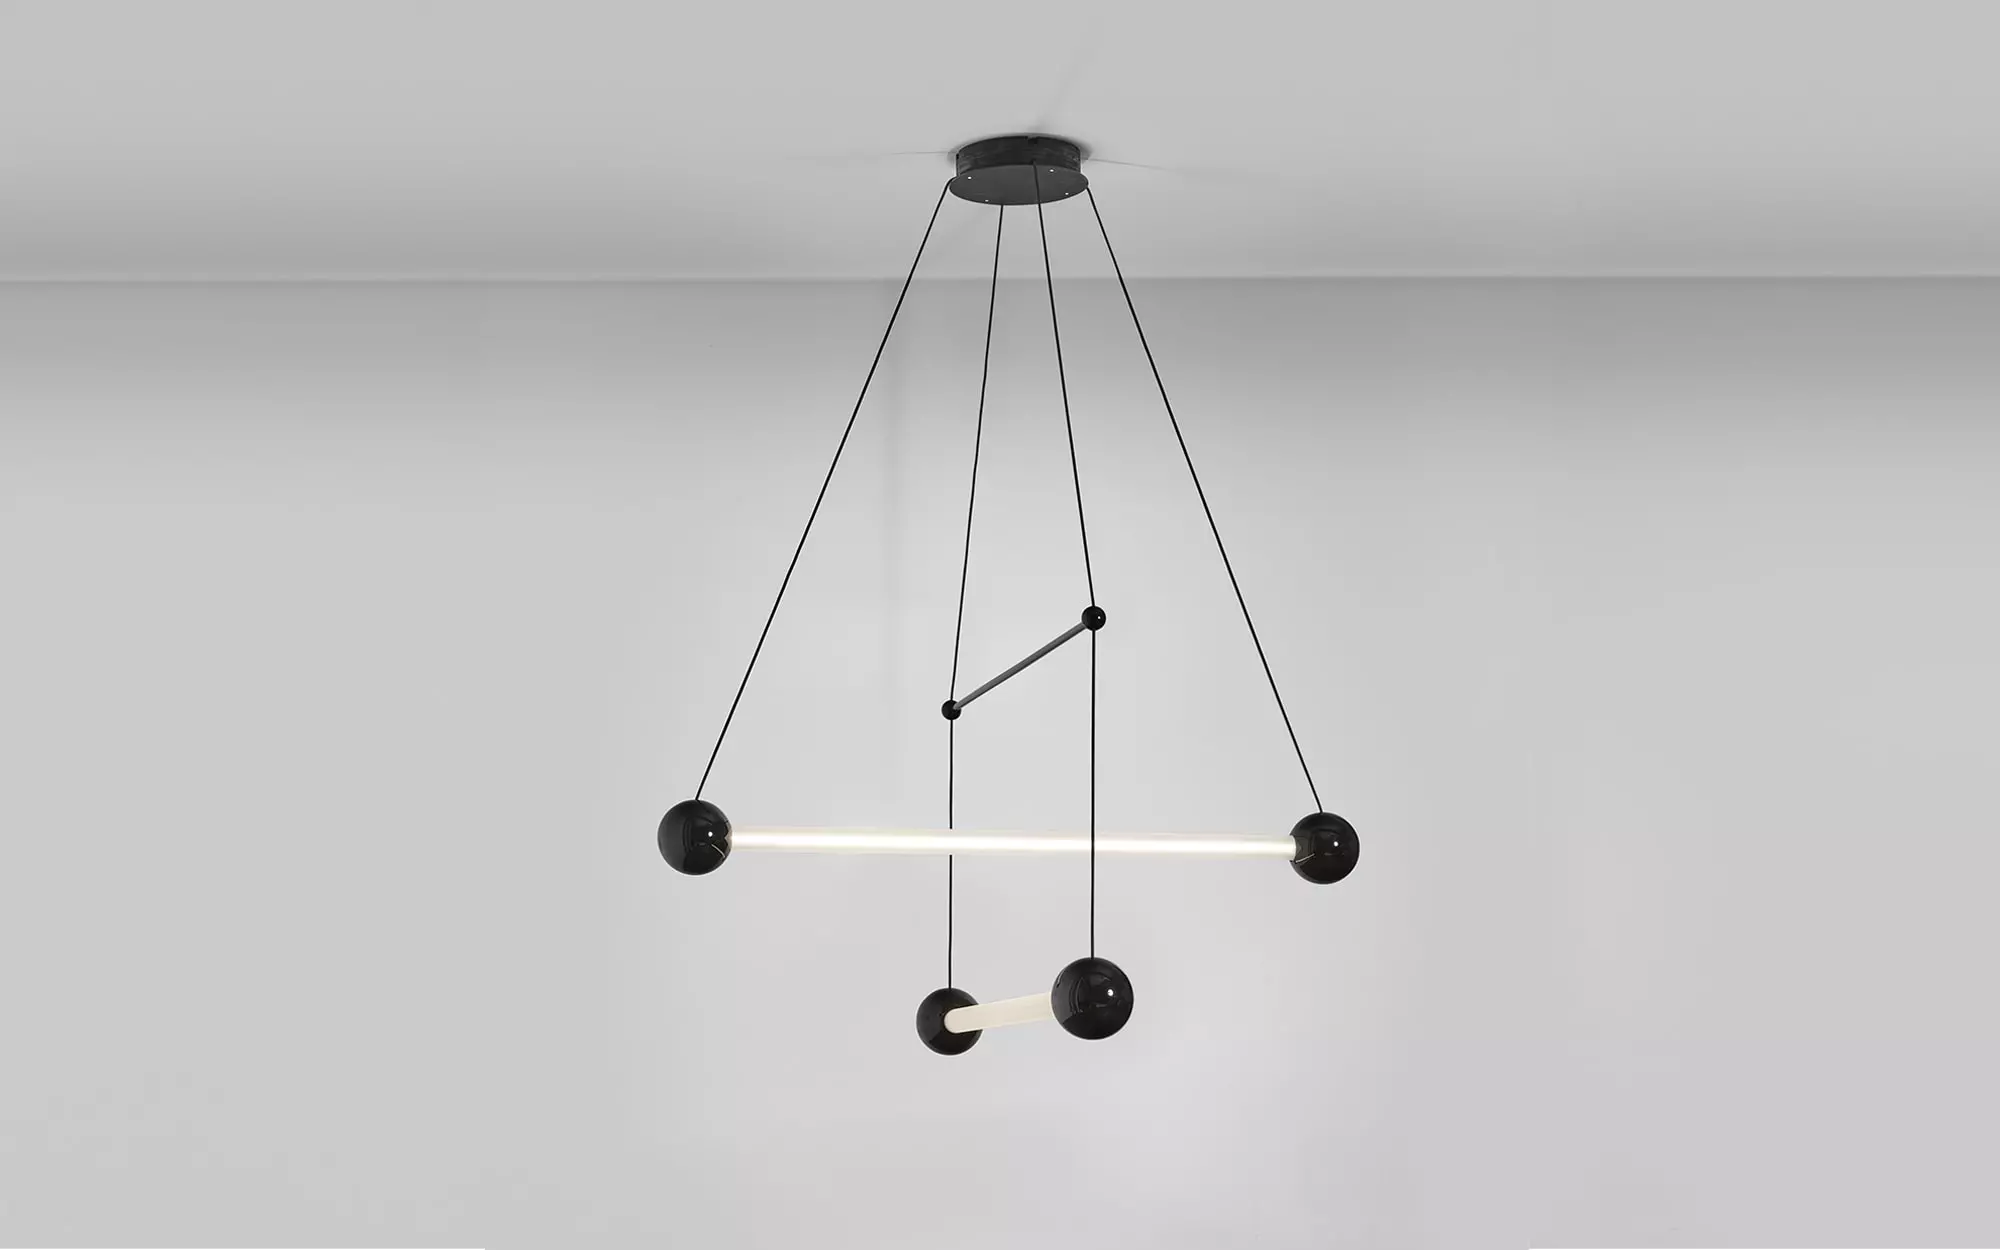 Trapeze 2 Ceiling light - Pierre Charpin - Coffee table - Galerie kreo